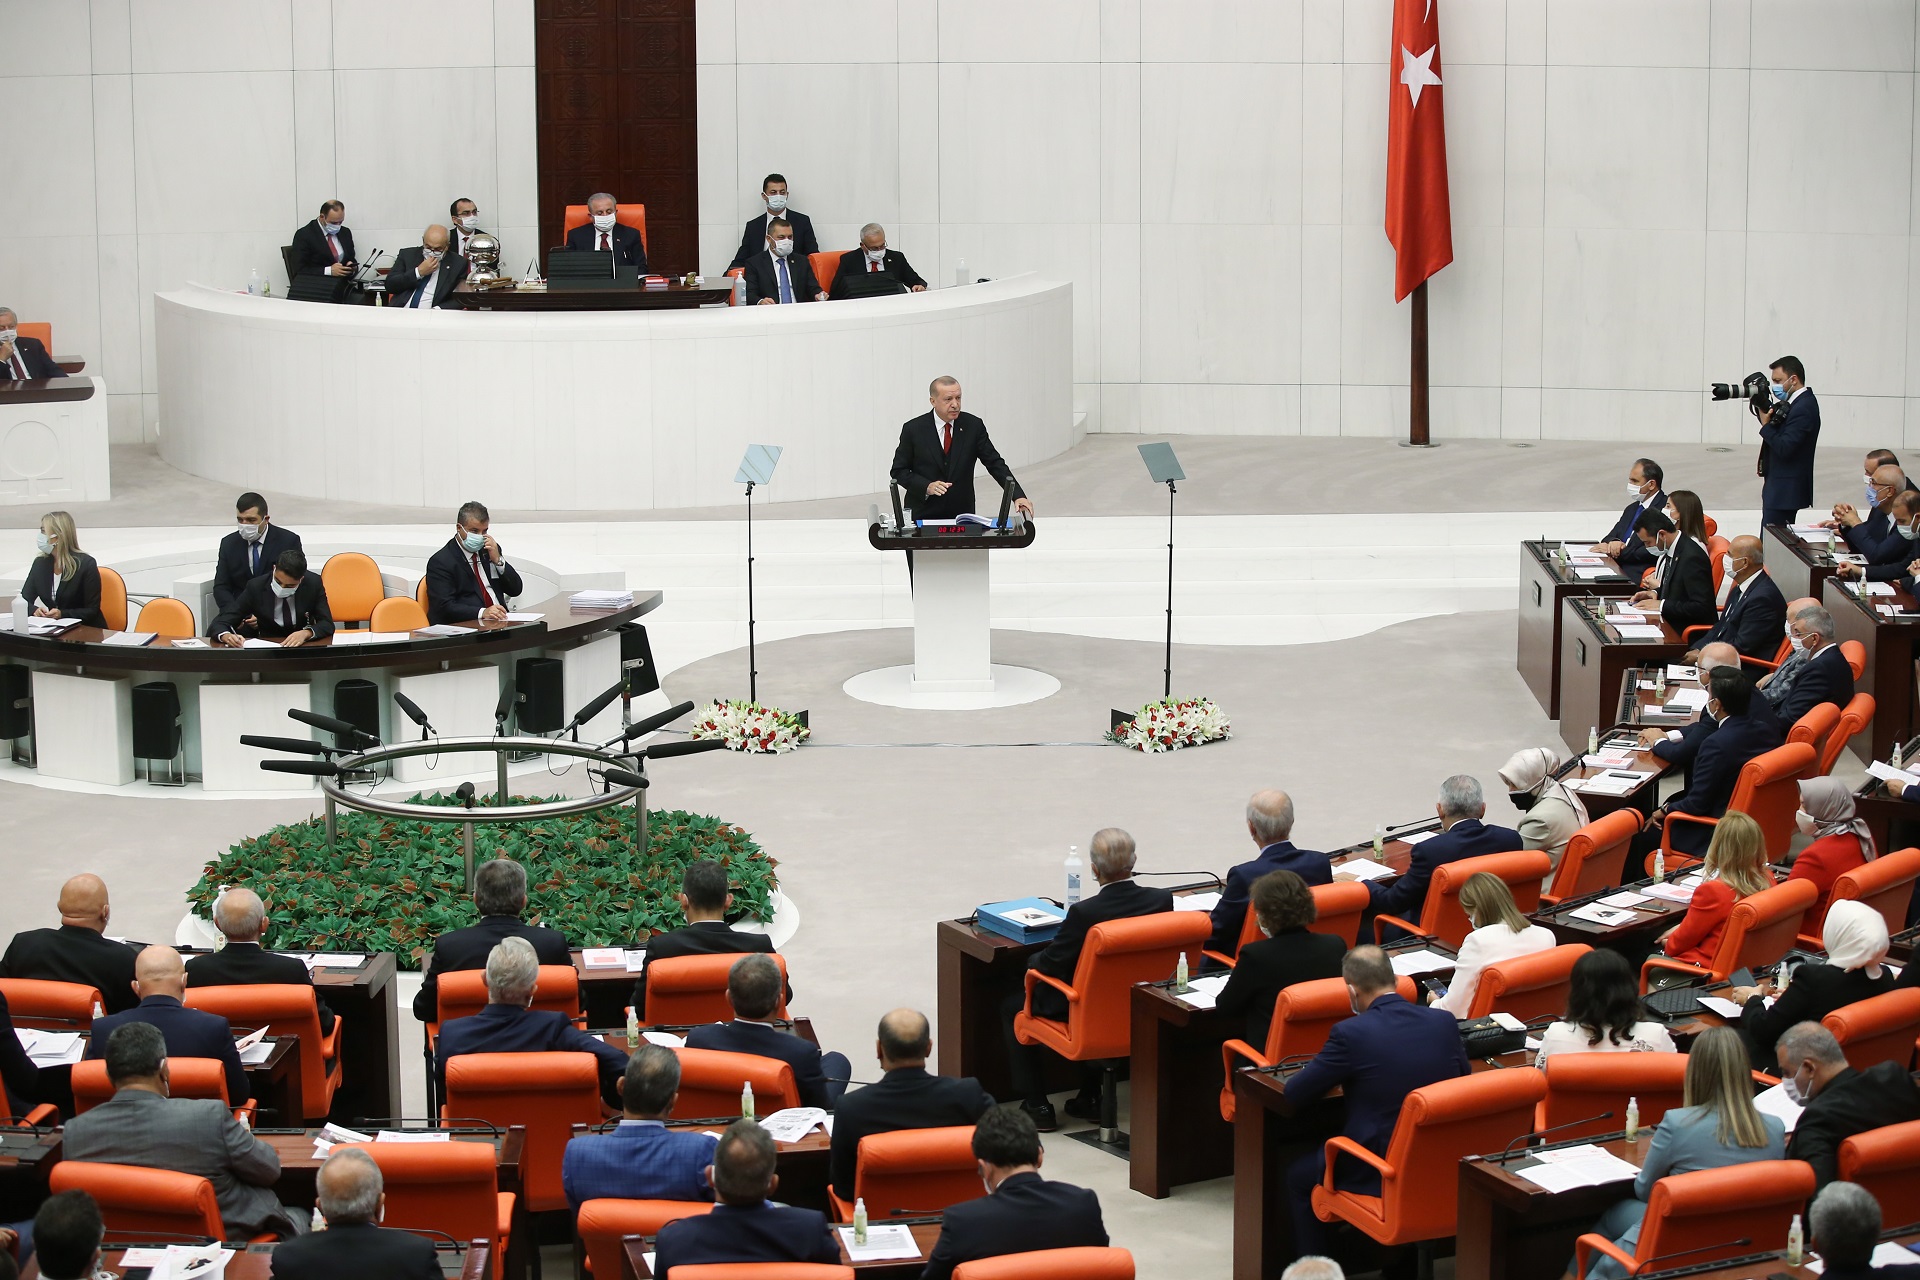 epa08711933 A handout photo made available by the Turkish President Press Office shows Turkish President Recep Tayyip Erdogan addresses members of the parliament during the opening ceremony of the 4th legislative year of the 27th Term of Grand National Assembly of Turkey (TBMM) in Ankara, Turkey, 01 October 2020.  EPA/TURKISH PRESIDENT PRESS OFFICE HANDOUT HANDOUT  HANDOUT EDITORIAL USE ONLY/NO SALES